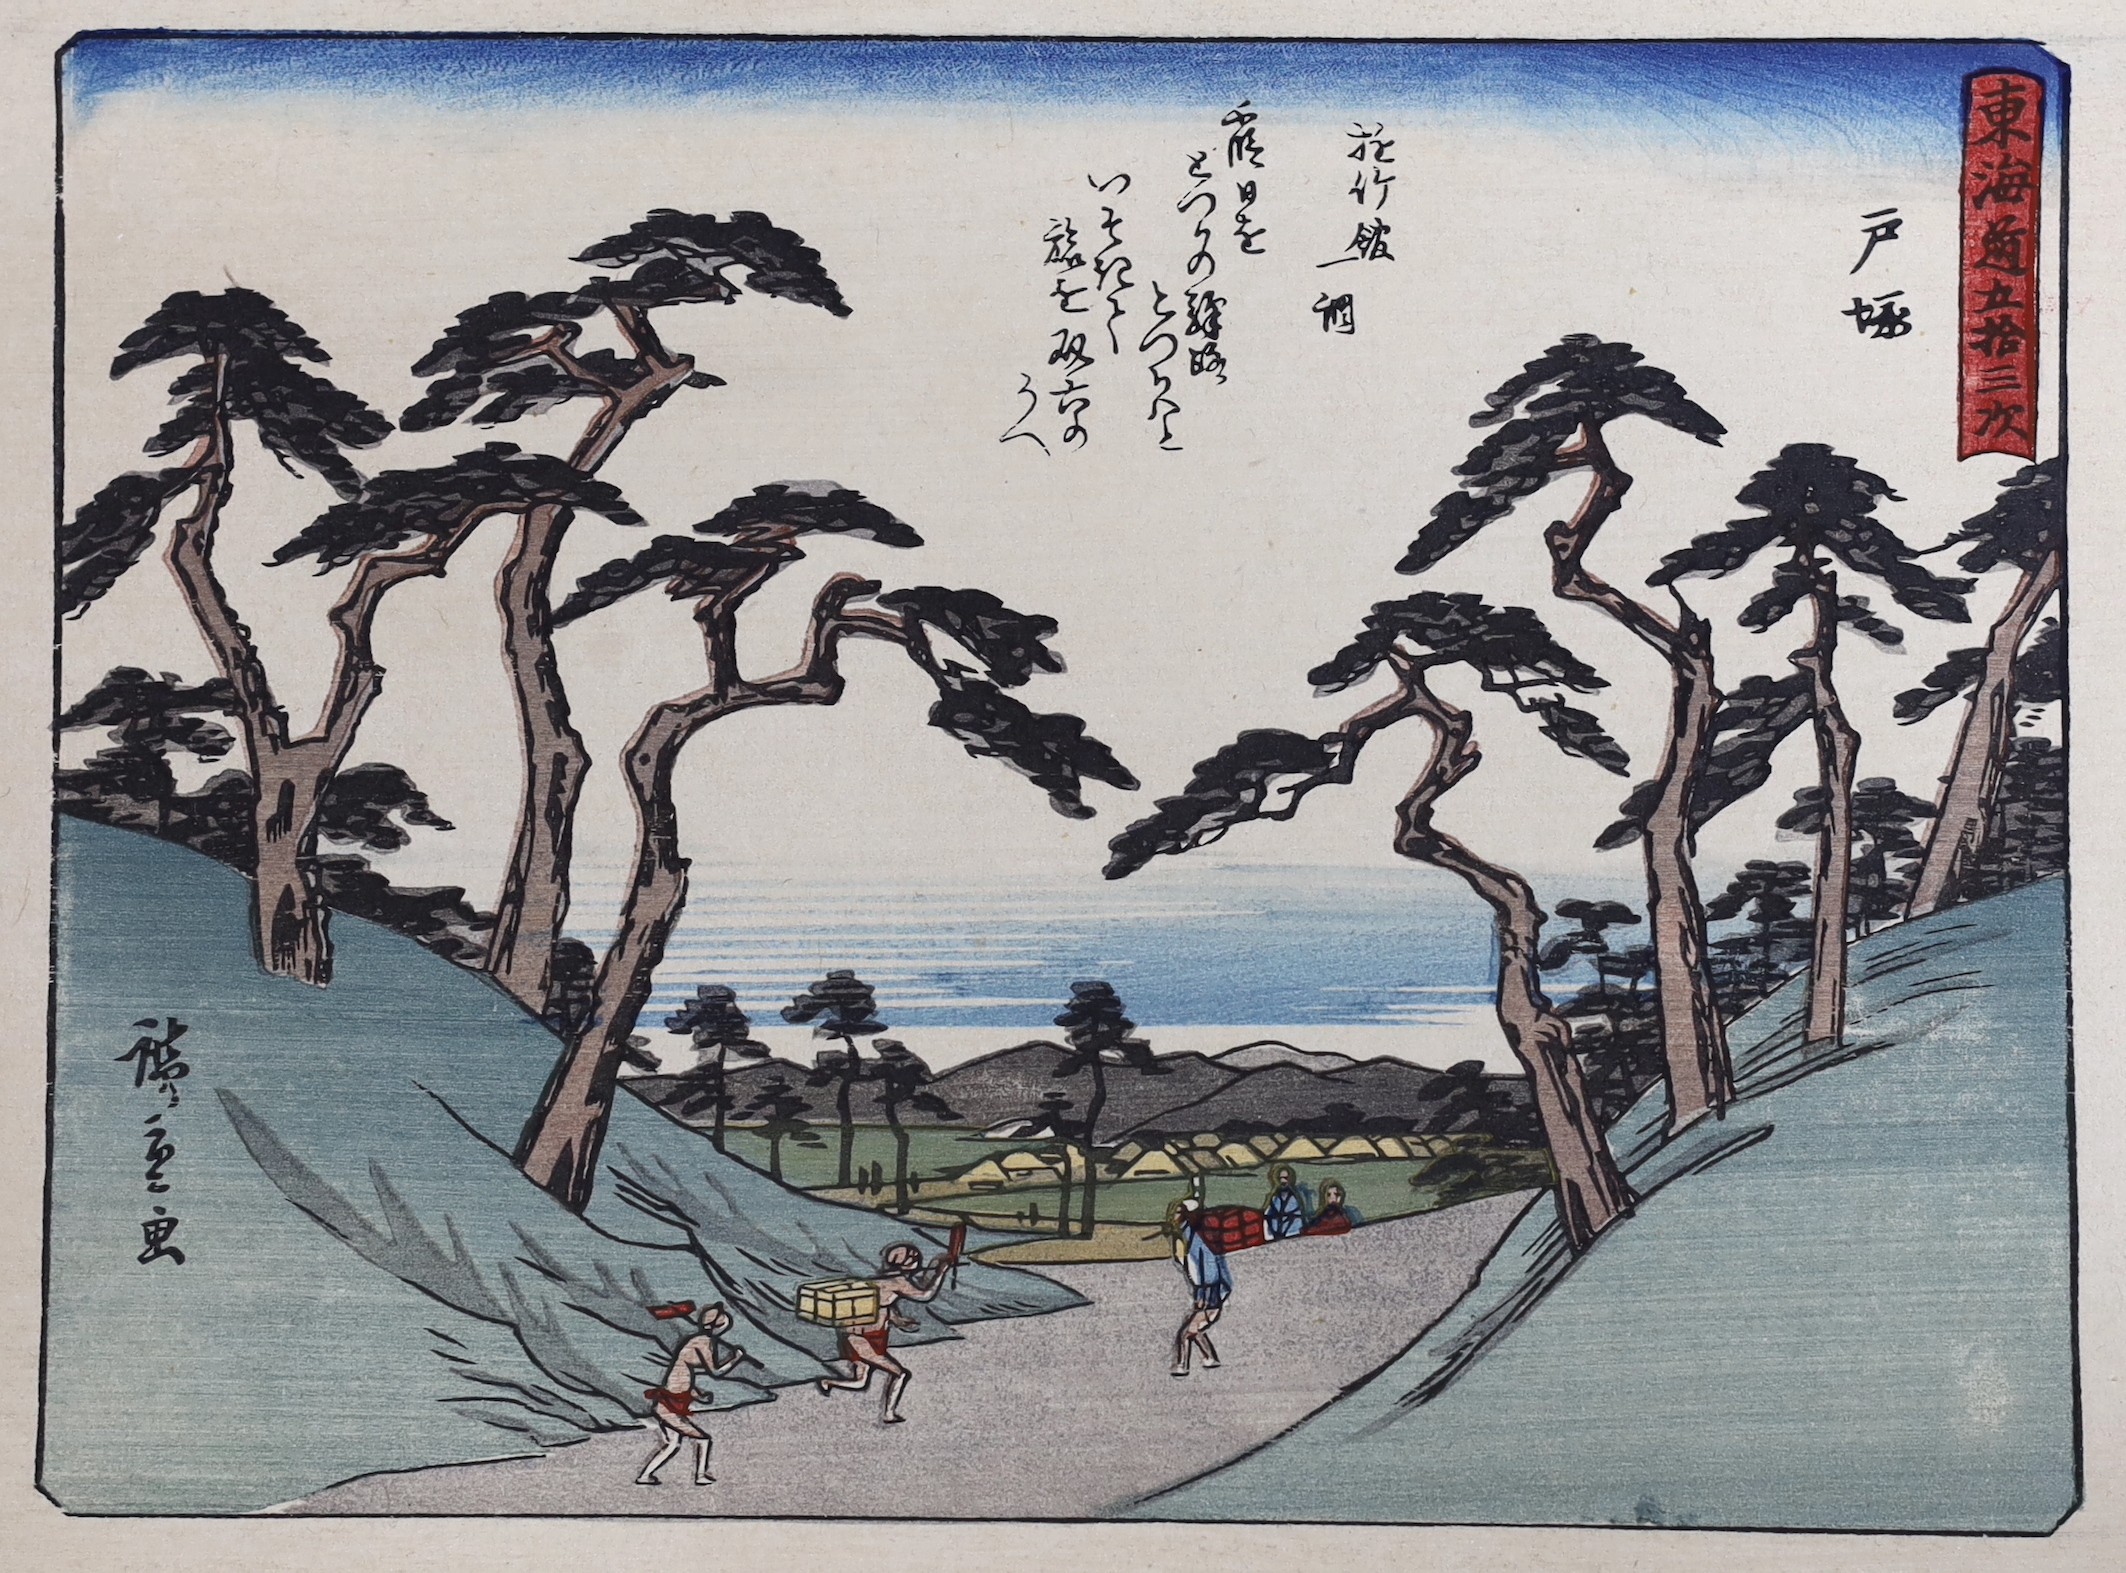 Hiroshige, two woodblock prints, Stations of The Tokaido, 21 x 29cm, unframed